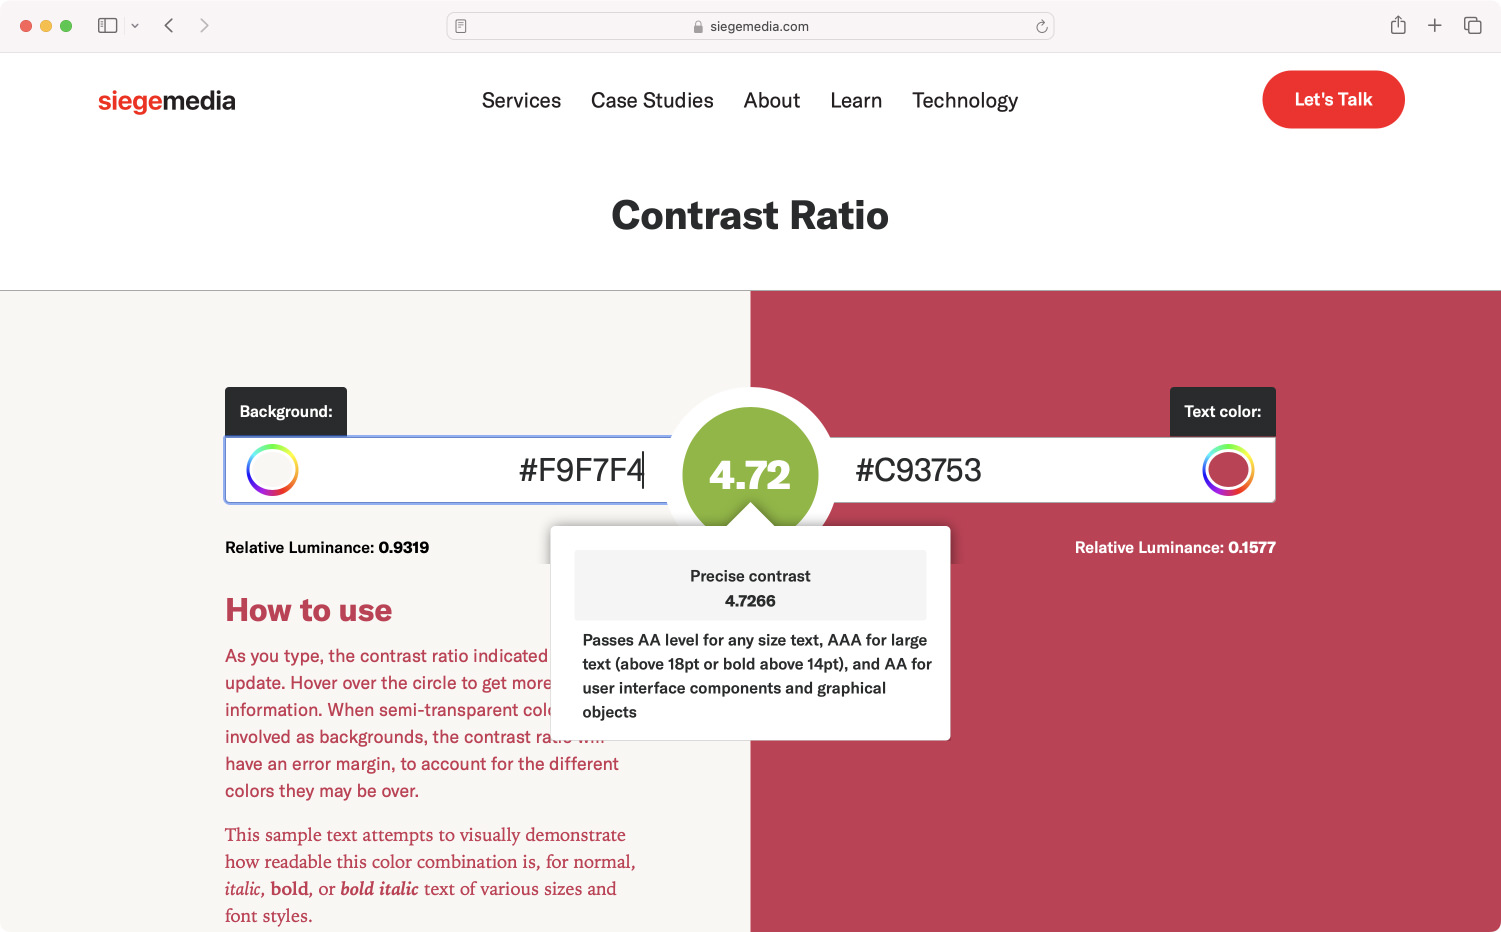 Screenshot of the website siegemedia.com/contrast-ratio. Contrast between a shade of dark red  and a shade of light beige is measured.